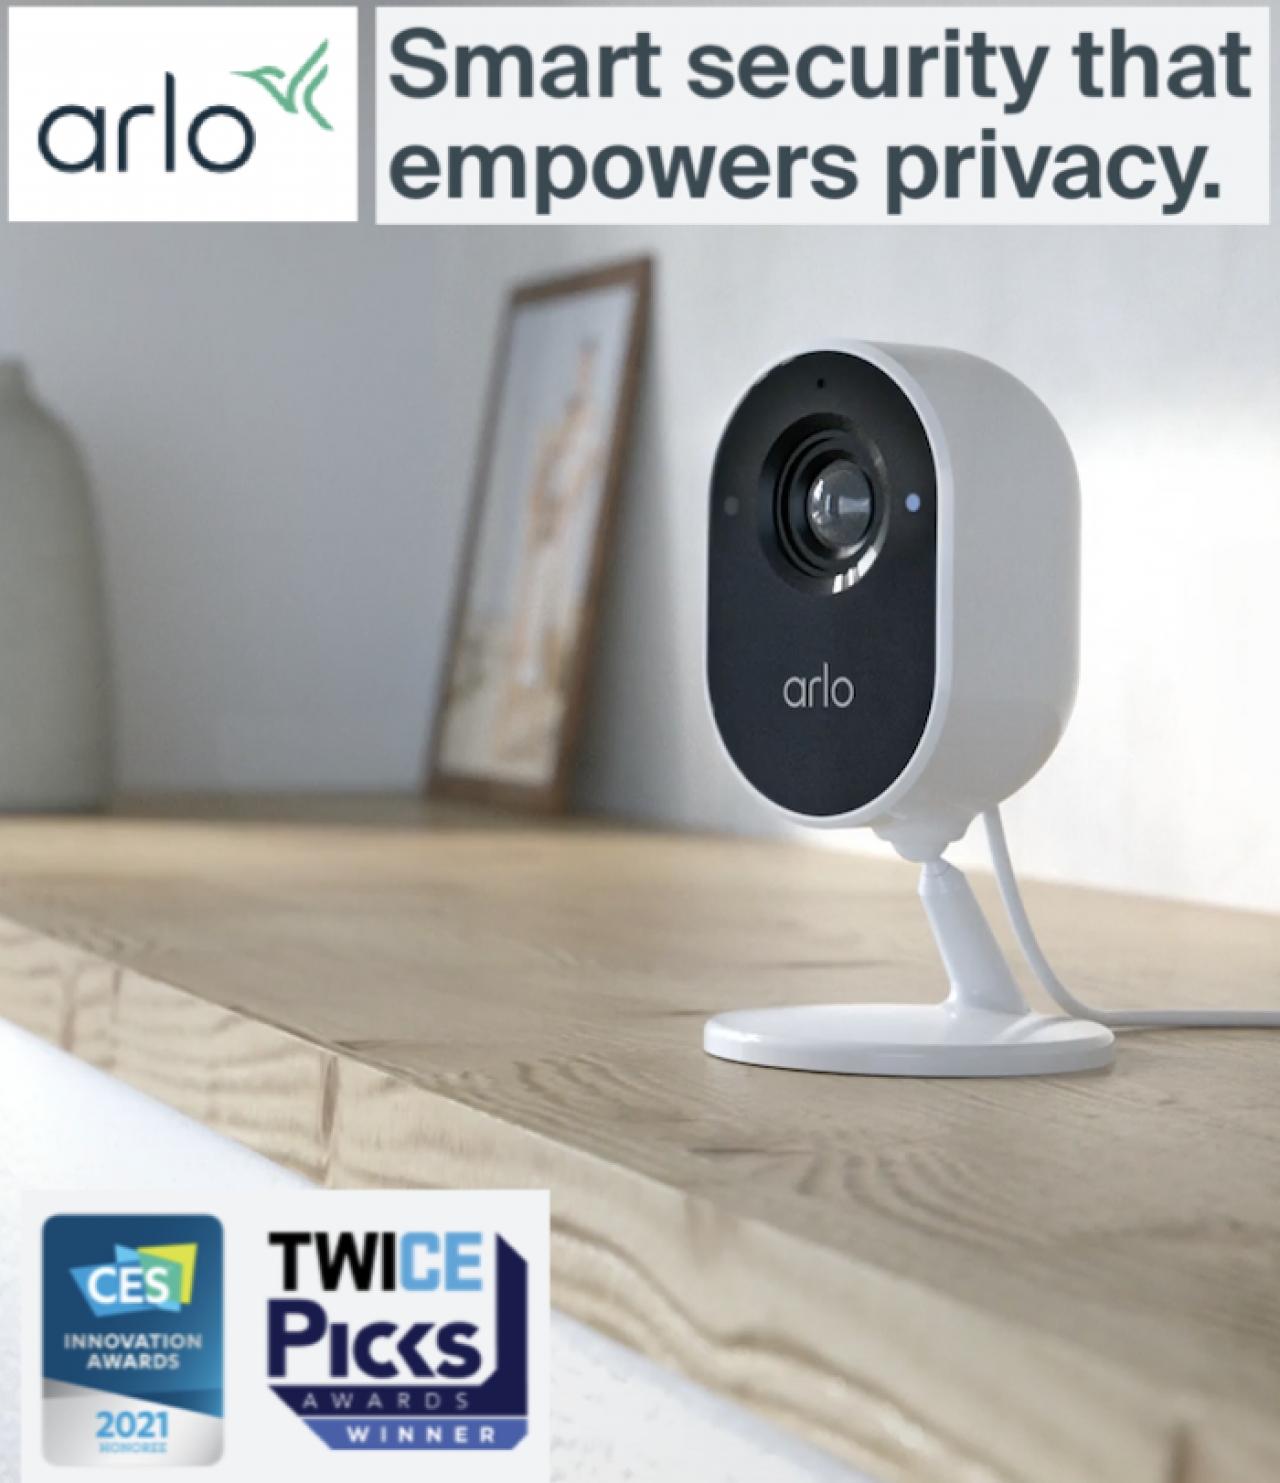 There's a huge sale on Arlo security cameras happening today